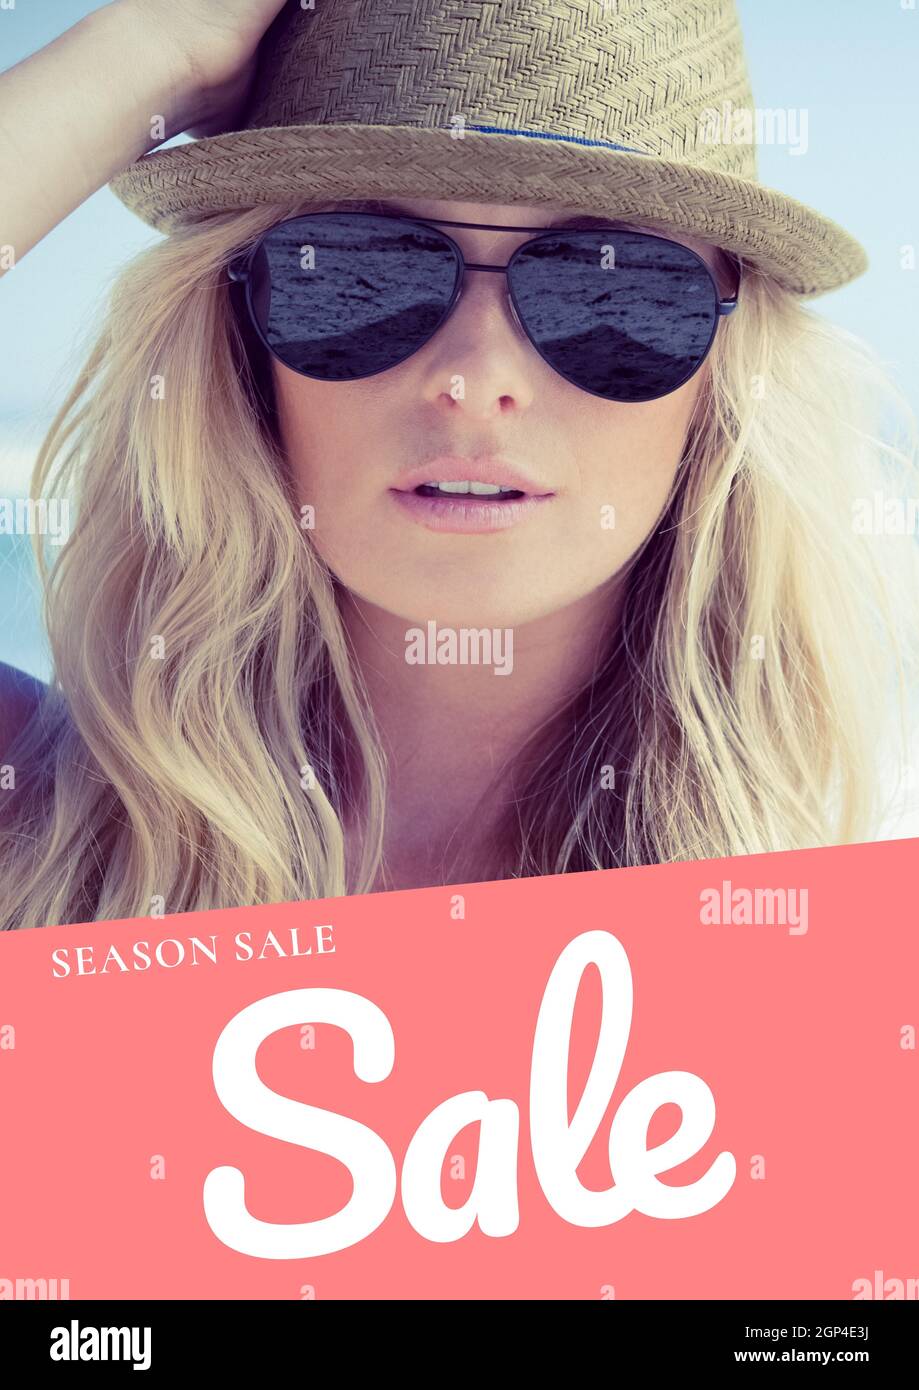 Composition of season sale text and caucasian woman wearing sunglasses and hat on pink background Stock Photo